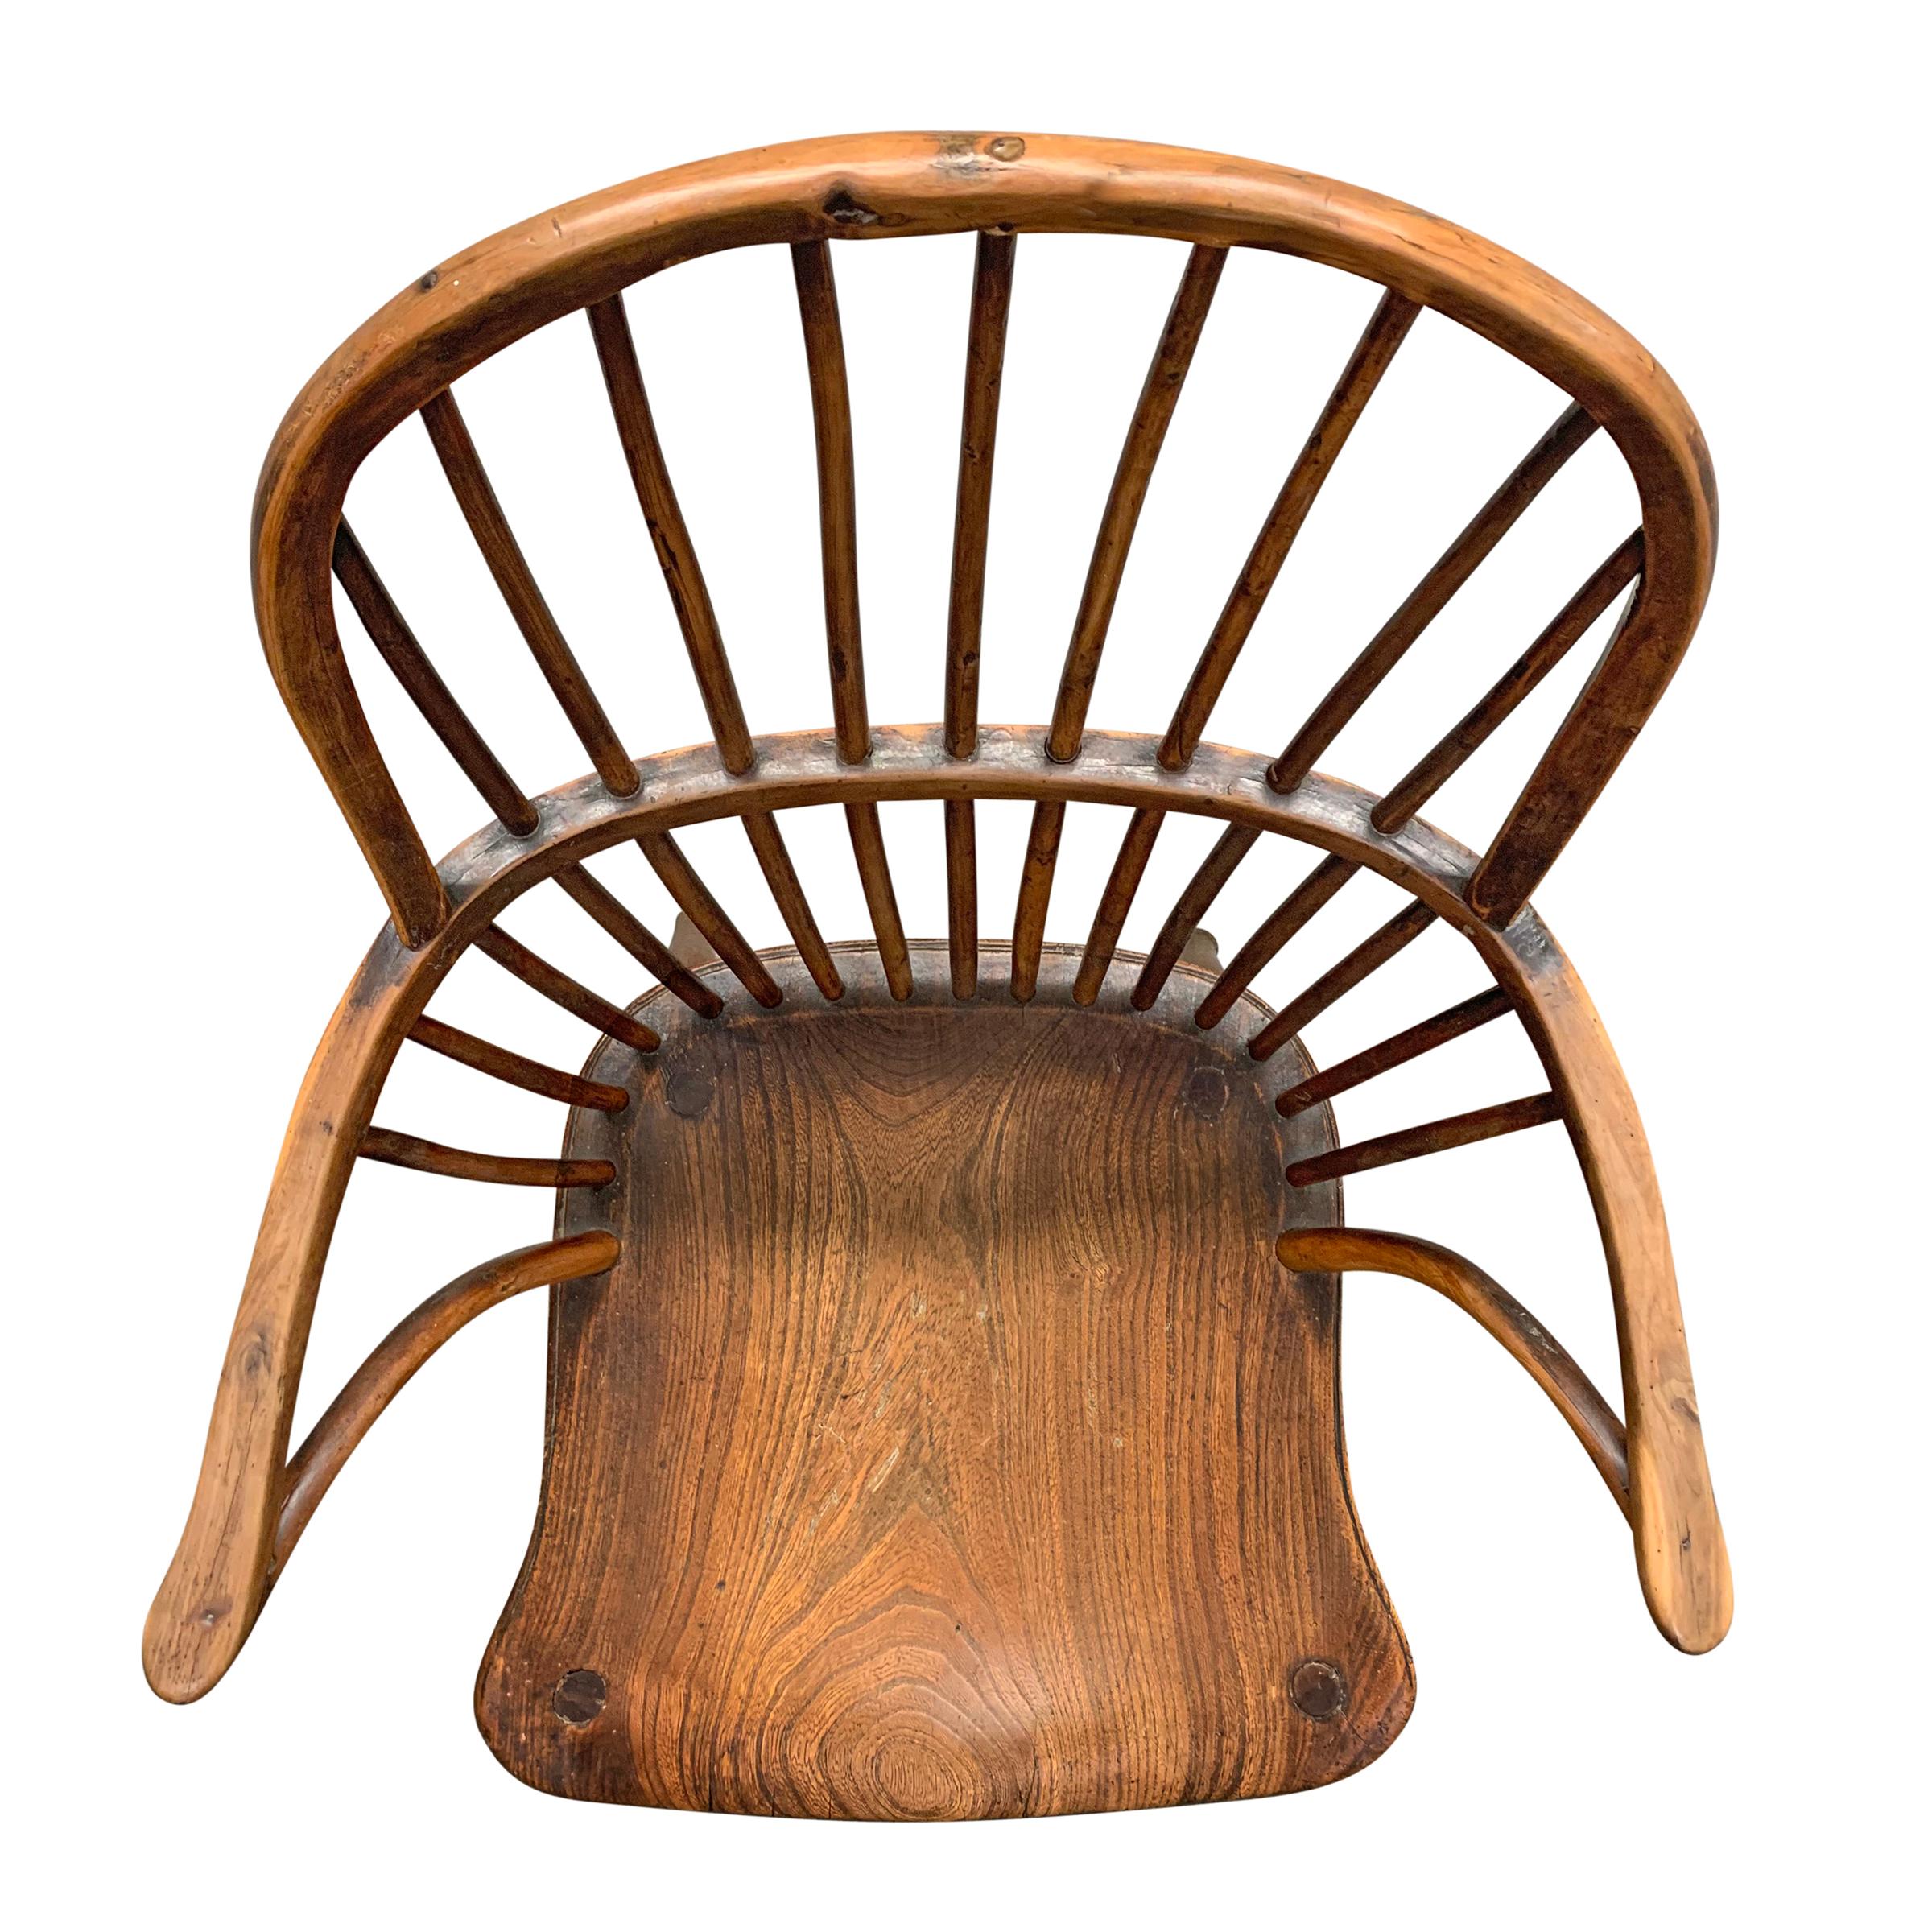 18th Century and Earlier 18th Century English Windsor Chair